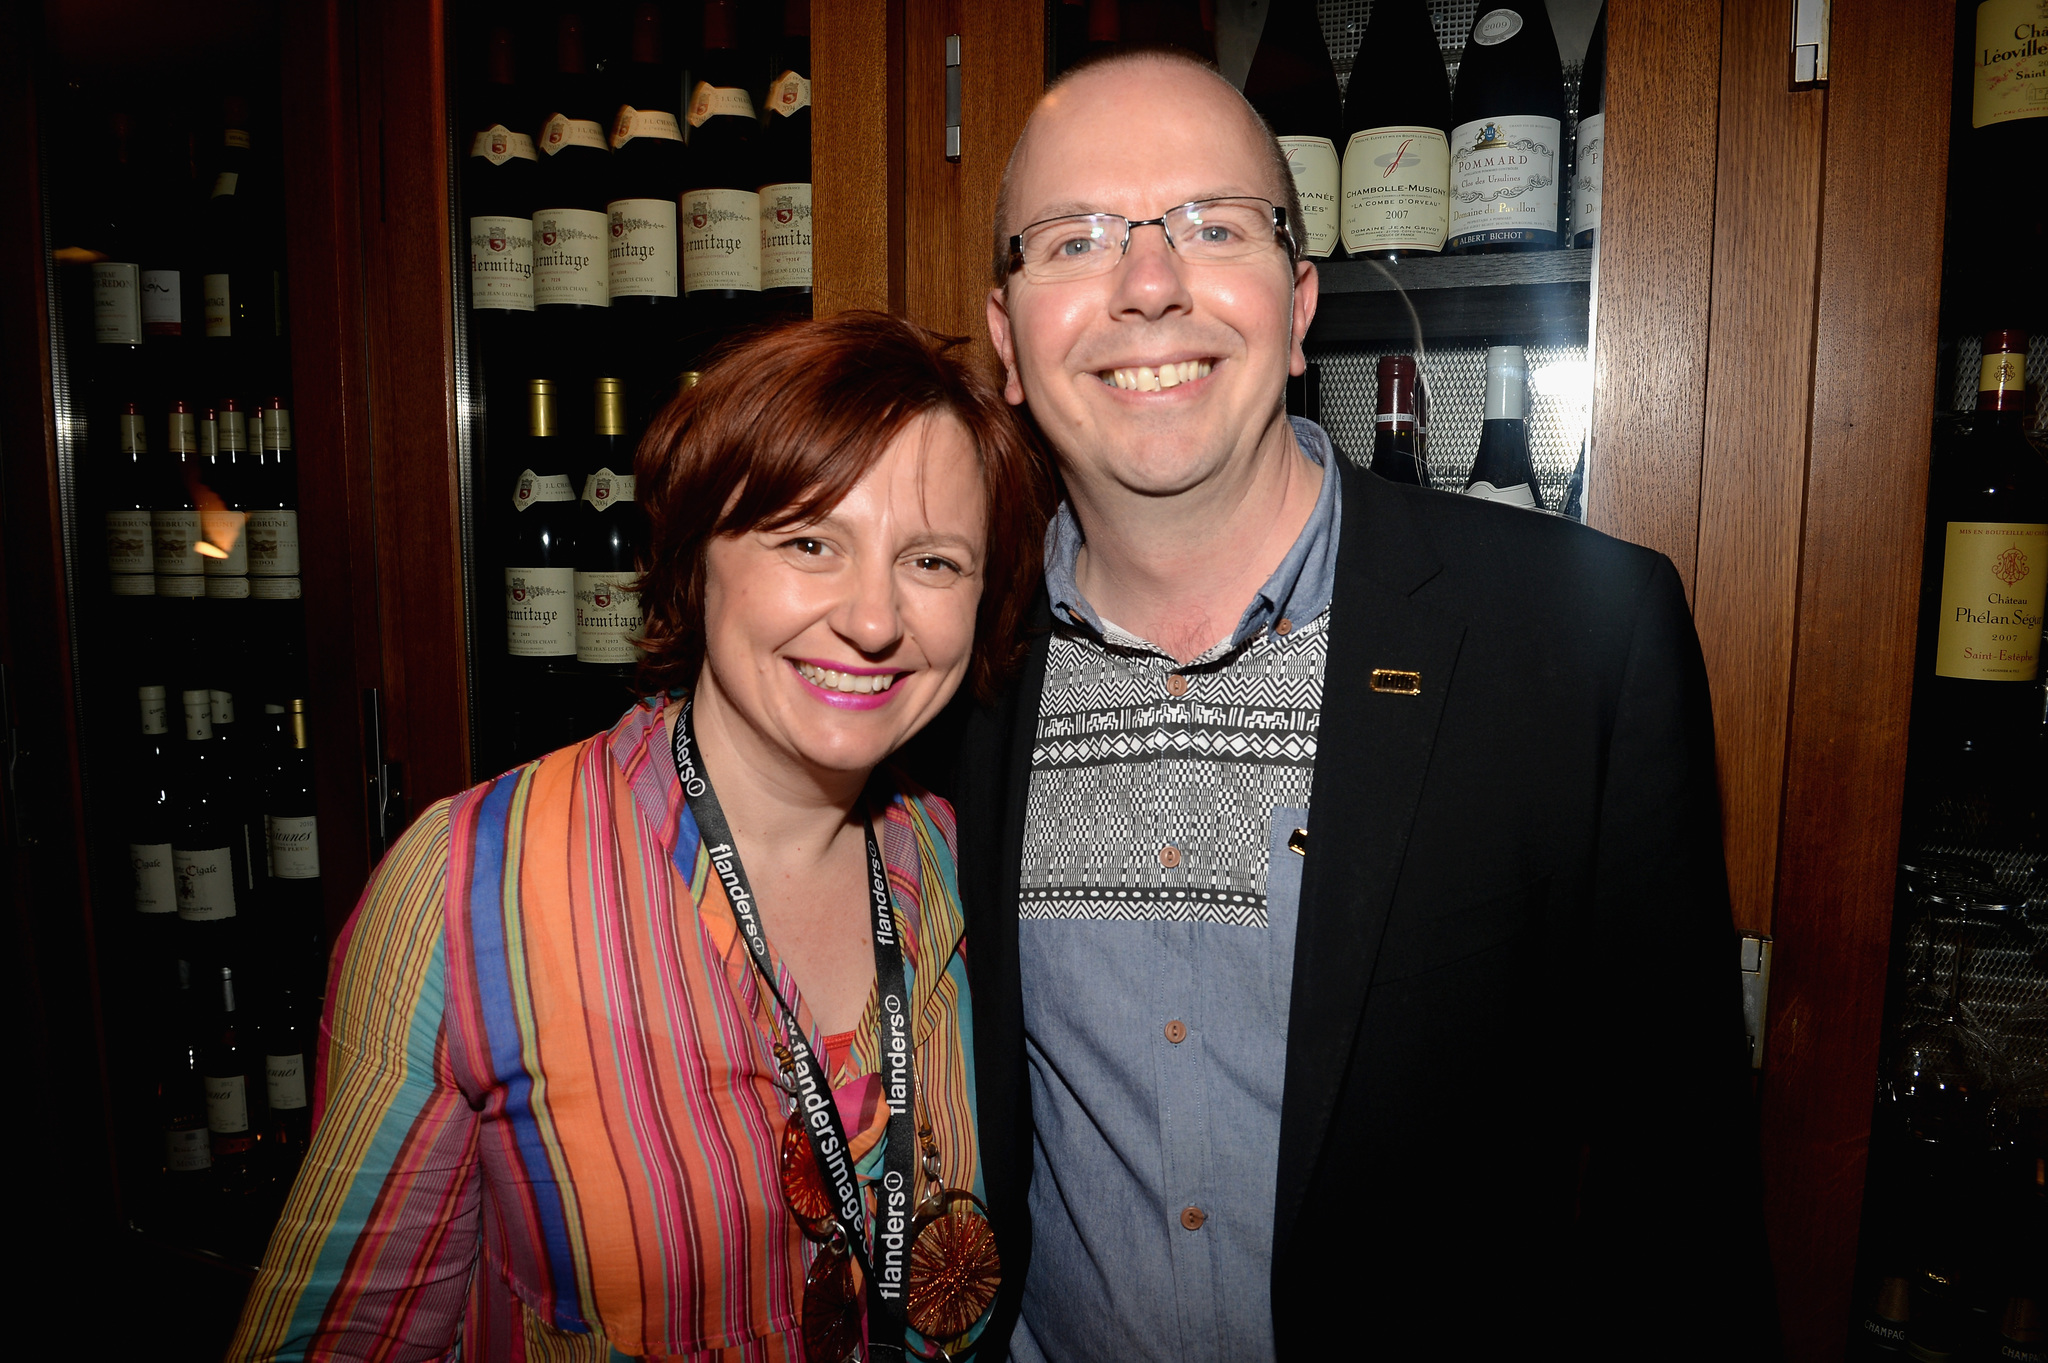 BFI's Claire Stewart and IMDb founder Col Needham attend the IMDB's 2013 Cannes Film Festival Dinner Party during the 66th Annual Cannes Film Festival at Restaurant Mantel on May 20, 2013 in Cannes, France.